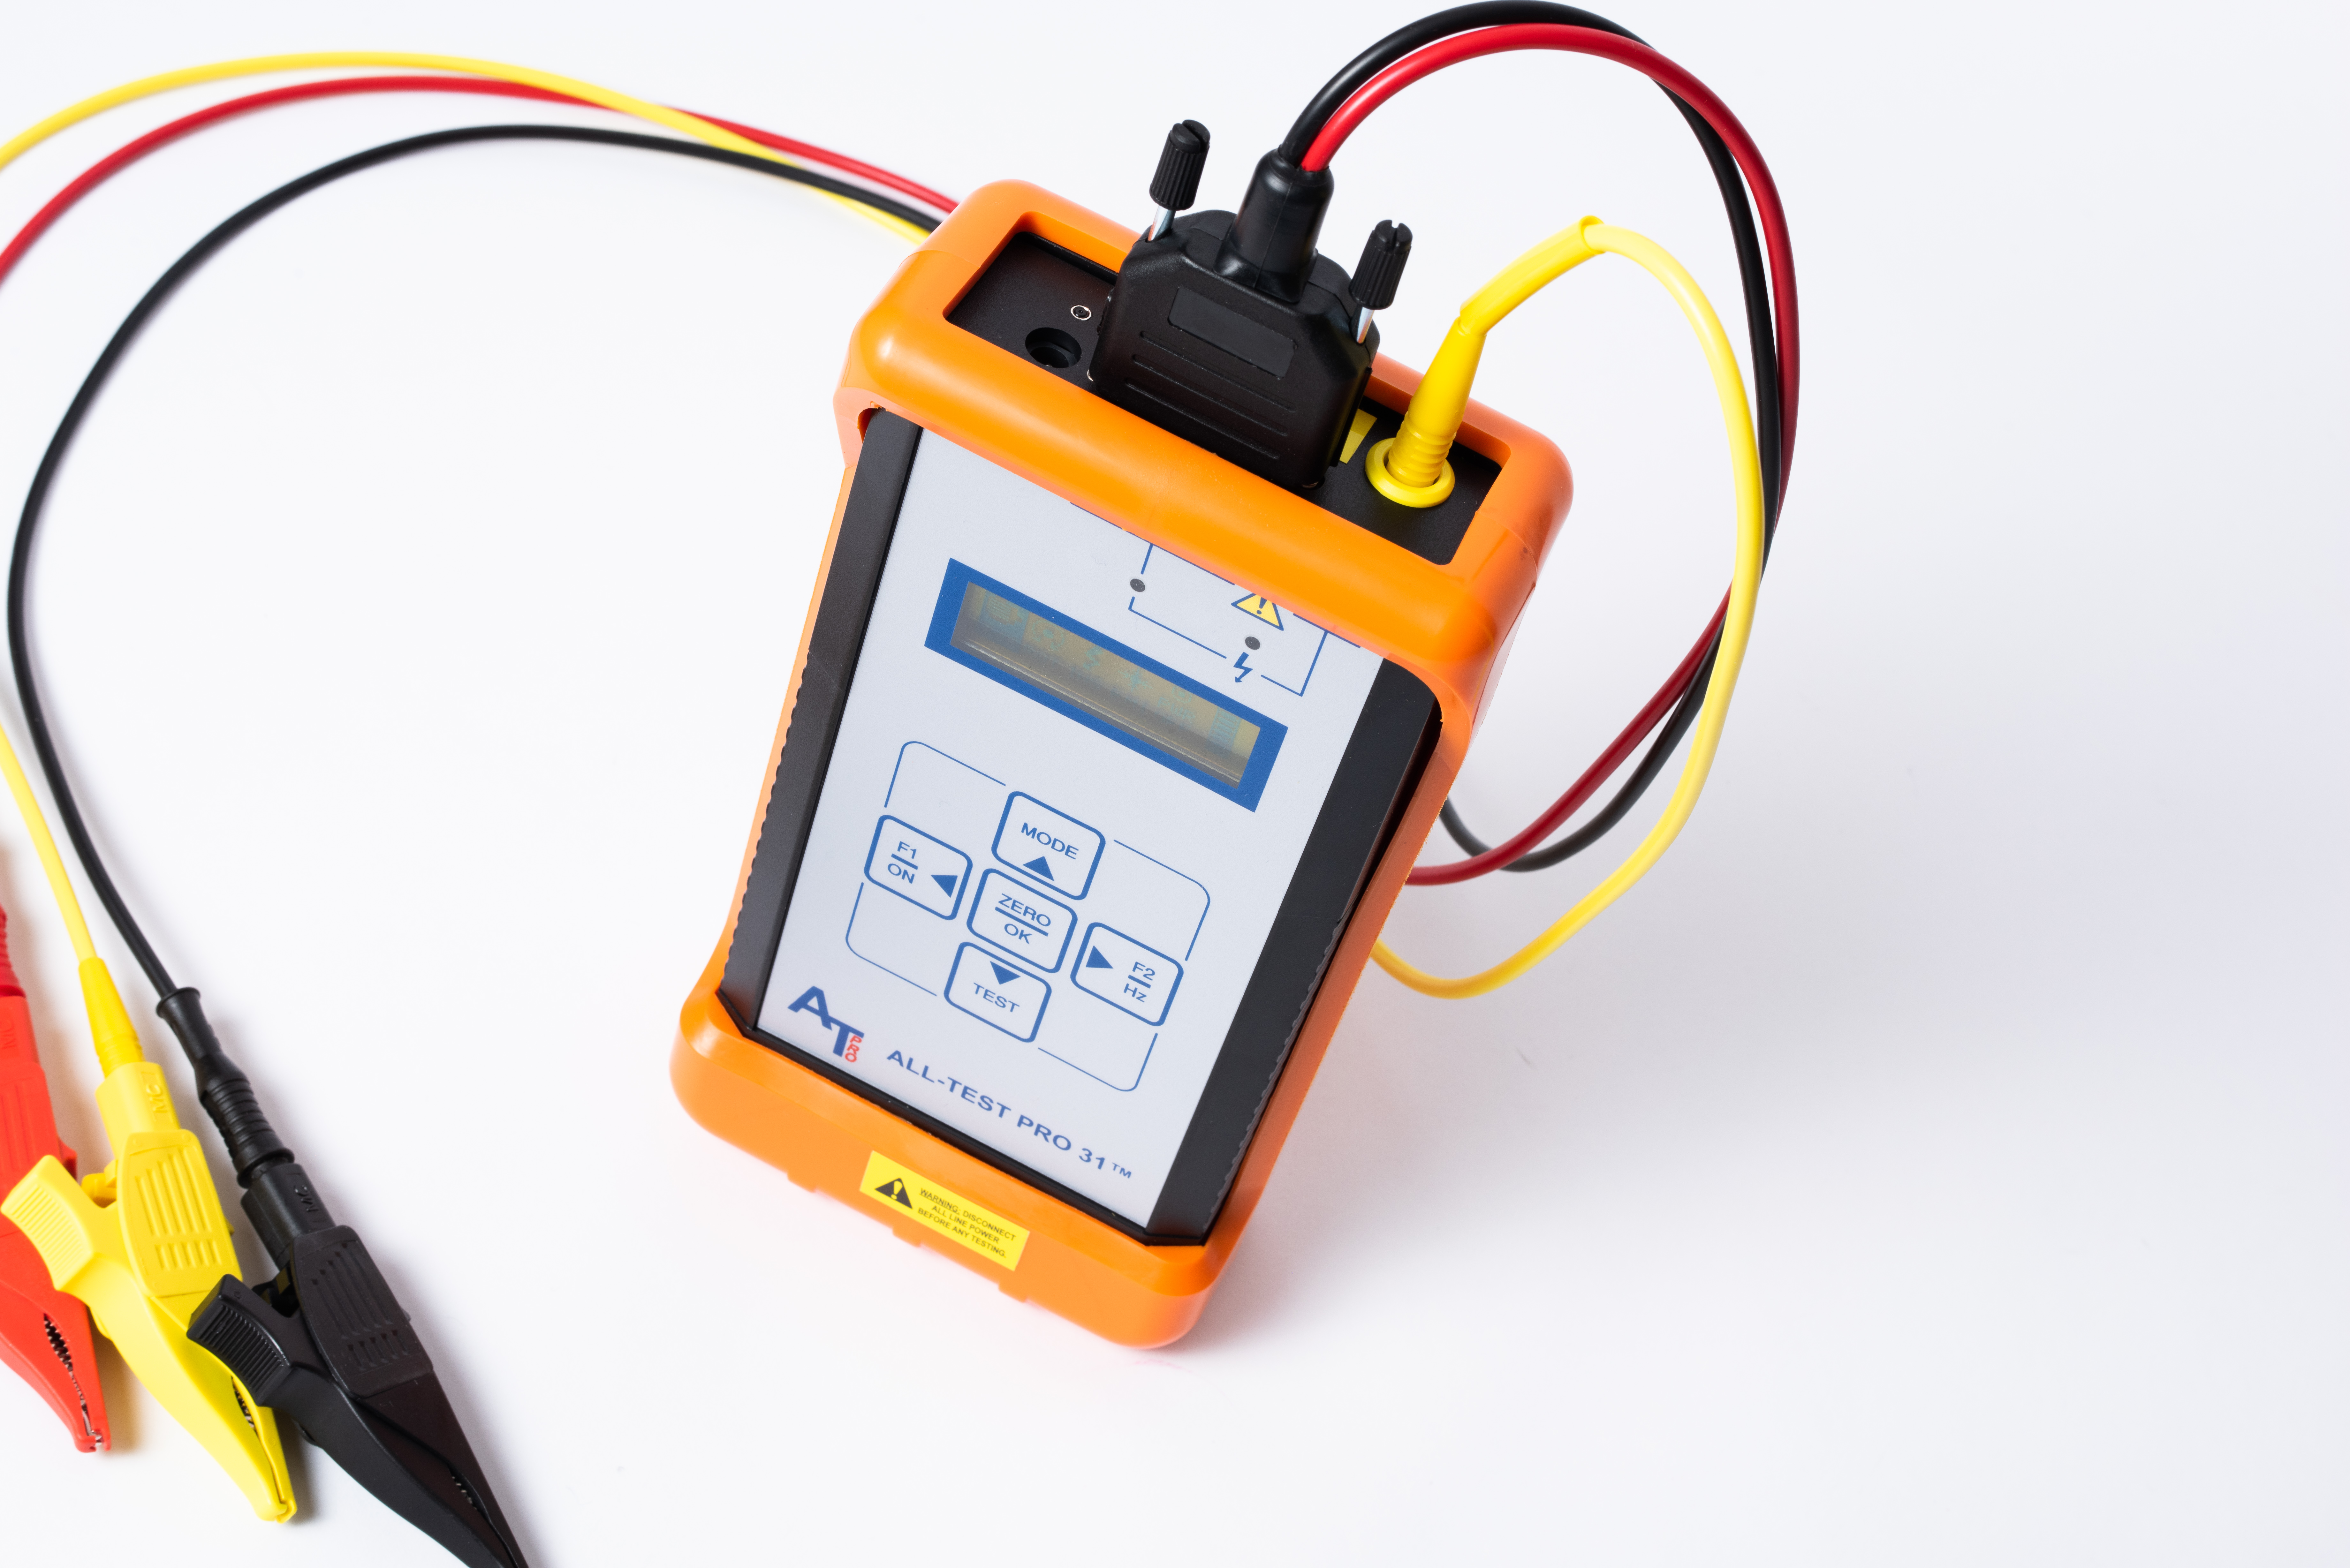 ALL-TEST PRO 31™ motor testing instrument with test leads against white background